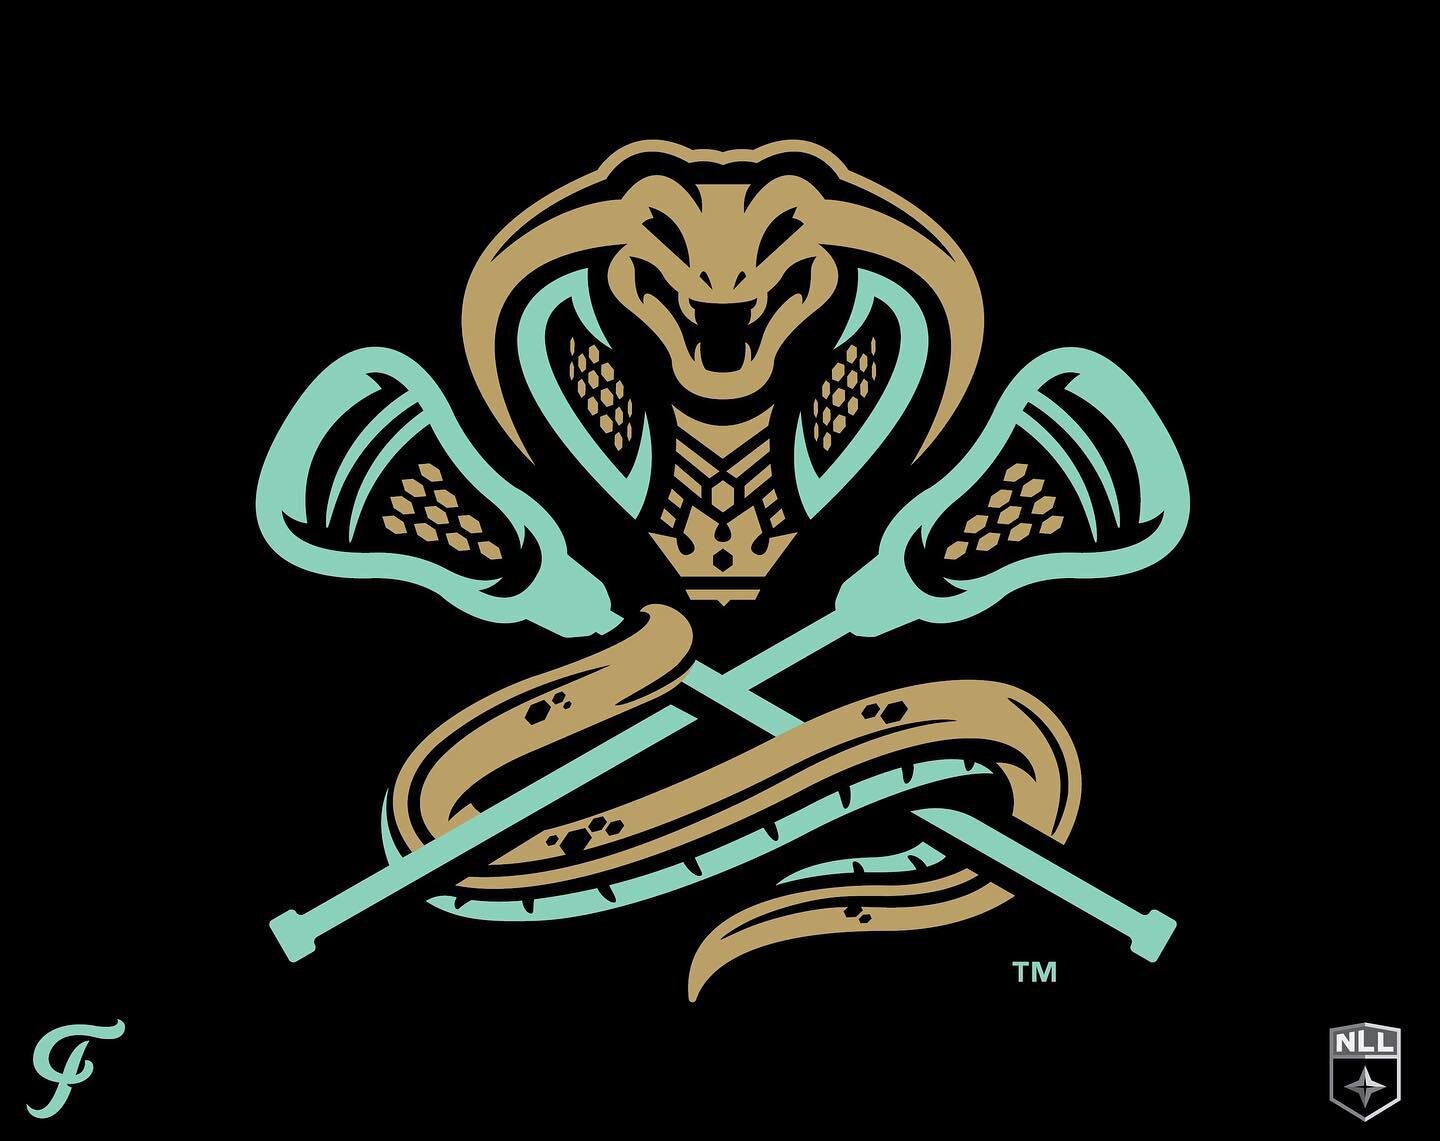 Not sure if #FangFriday is a thing but&hellip;King cobra in the Queen City. 

The newest @NLL UnBOXed collective, Charlotte Cobras. #NLLUnBOXed
&bull;
&bull;
&bull;
#Charlotte #CLT #Cobras #Lacrosse #Lax #NLL #NorthCarolina #Branding #SportsLogo #Des